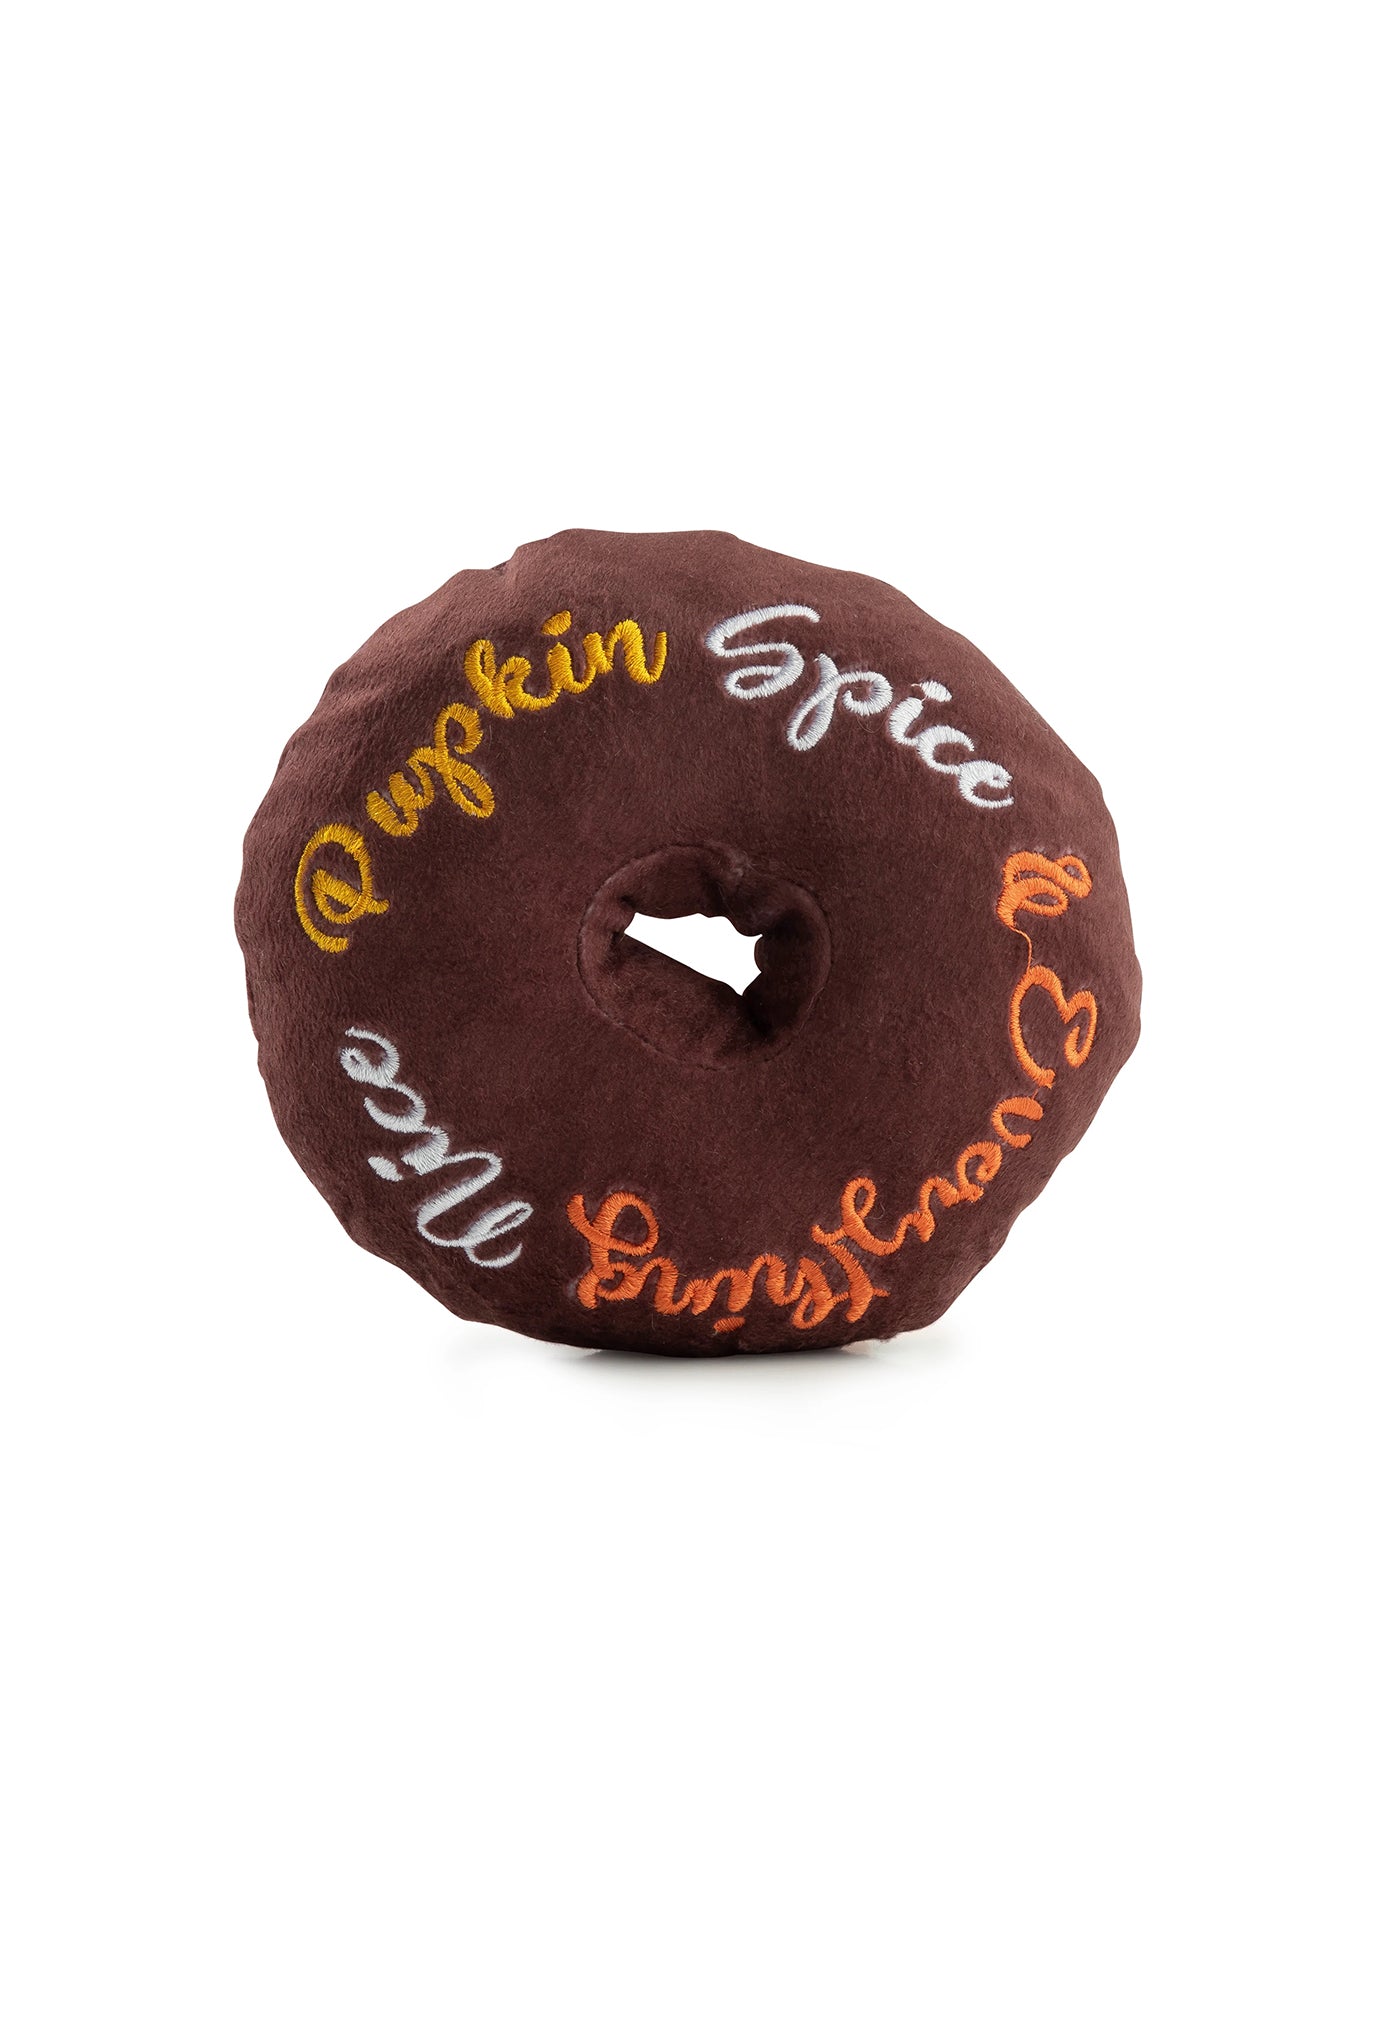 Pupkin Spice Donut sold by Angel Divine